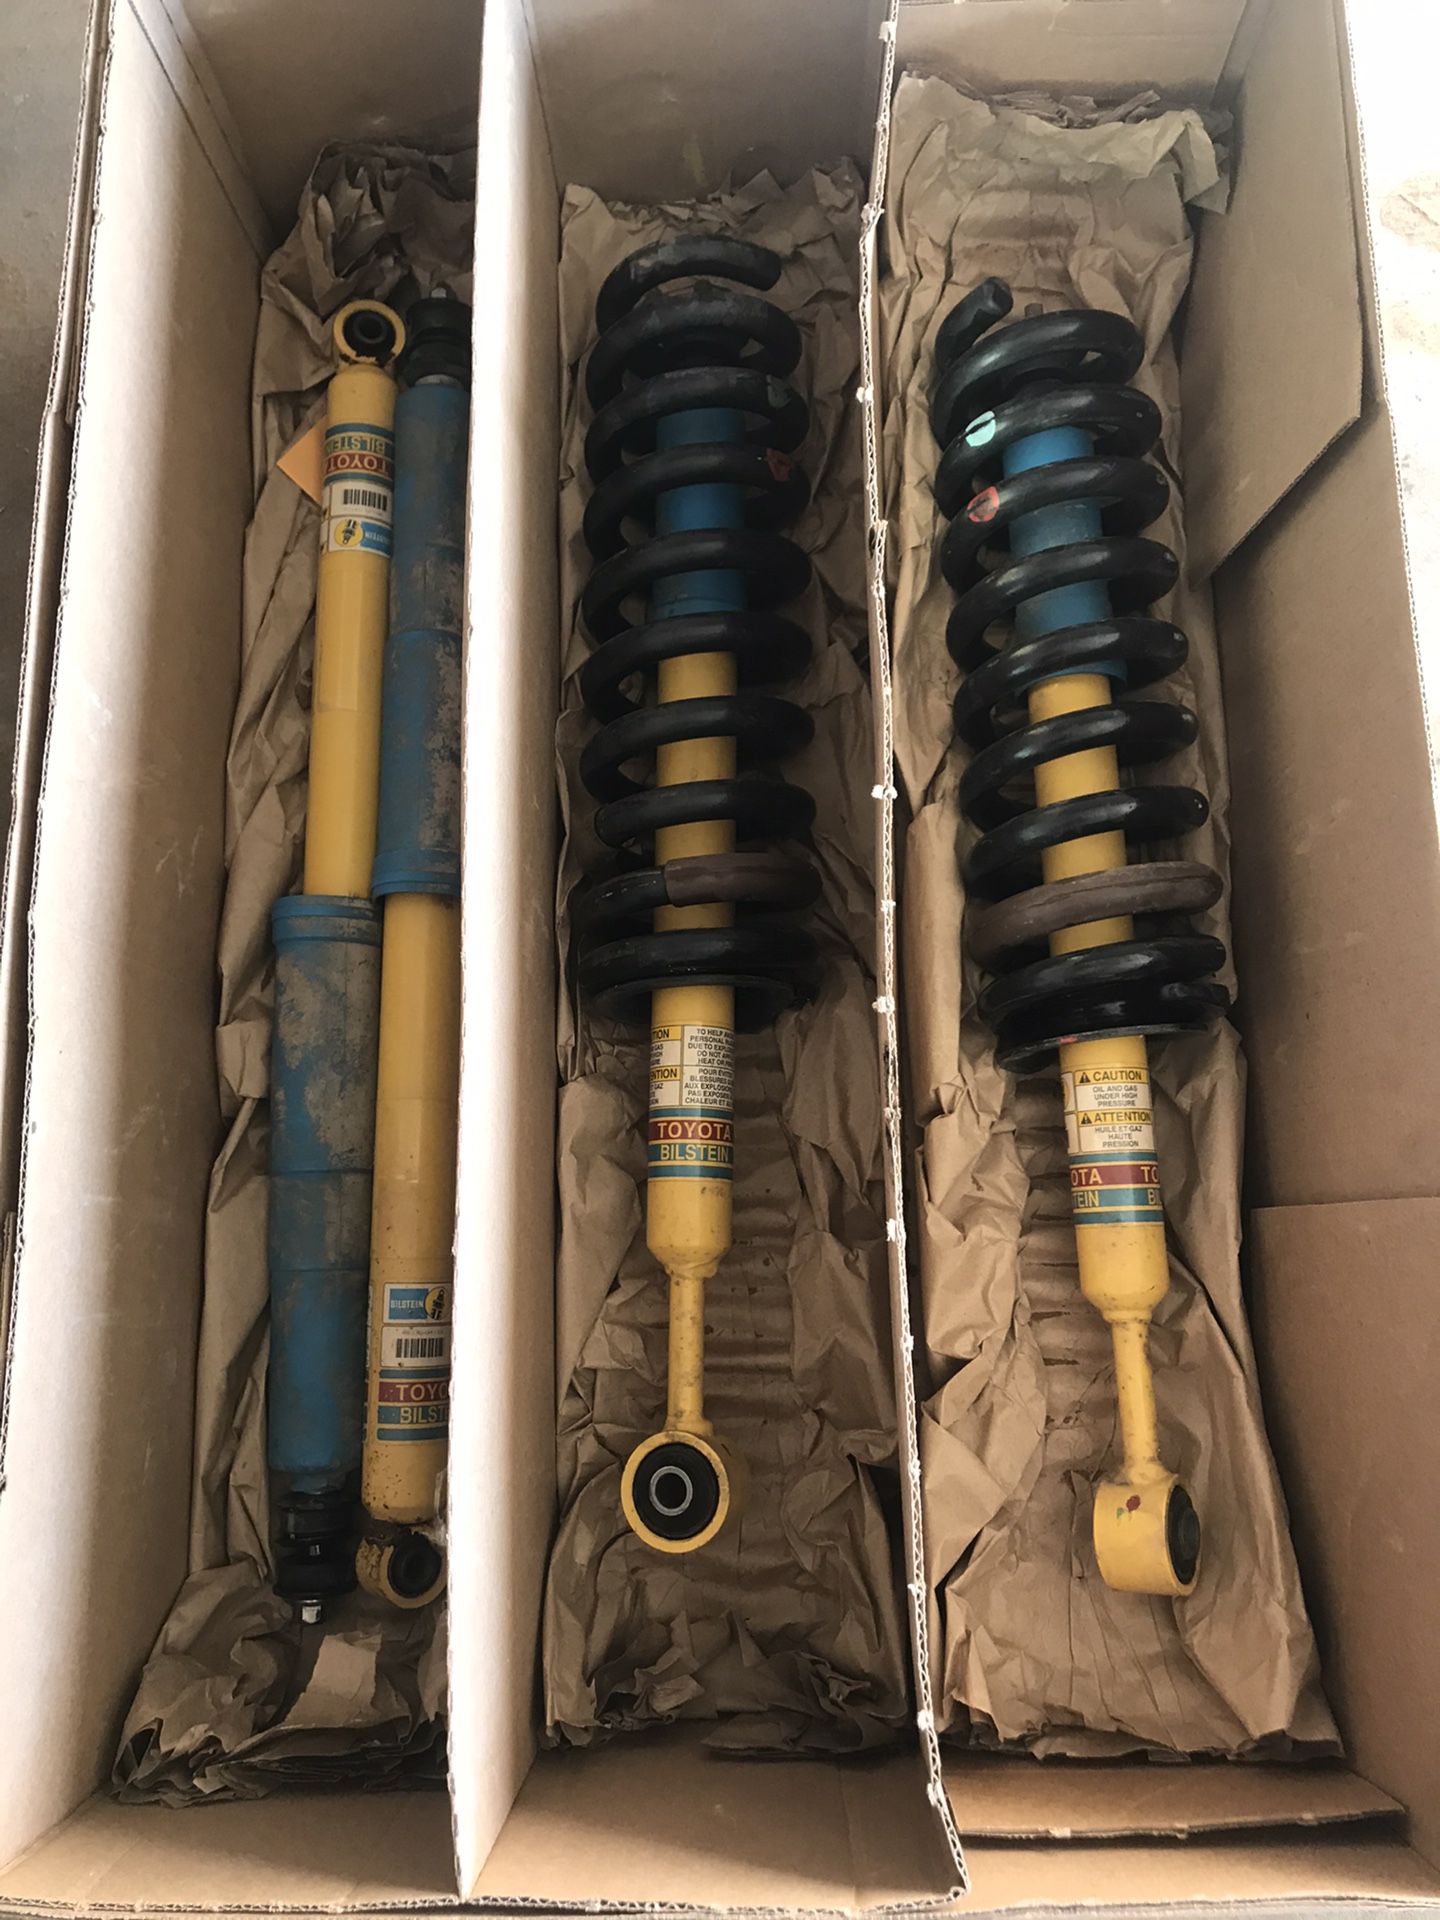 Toyota Bilstein TRD Off-road shocks and springs